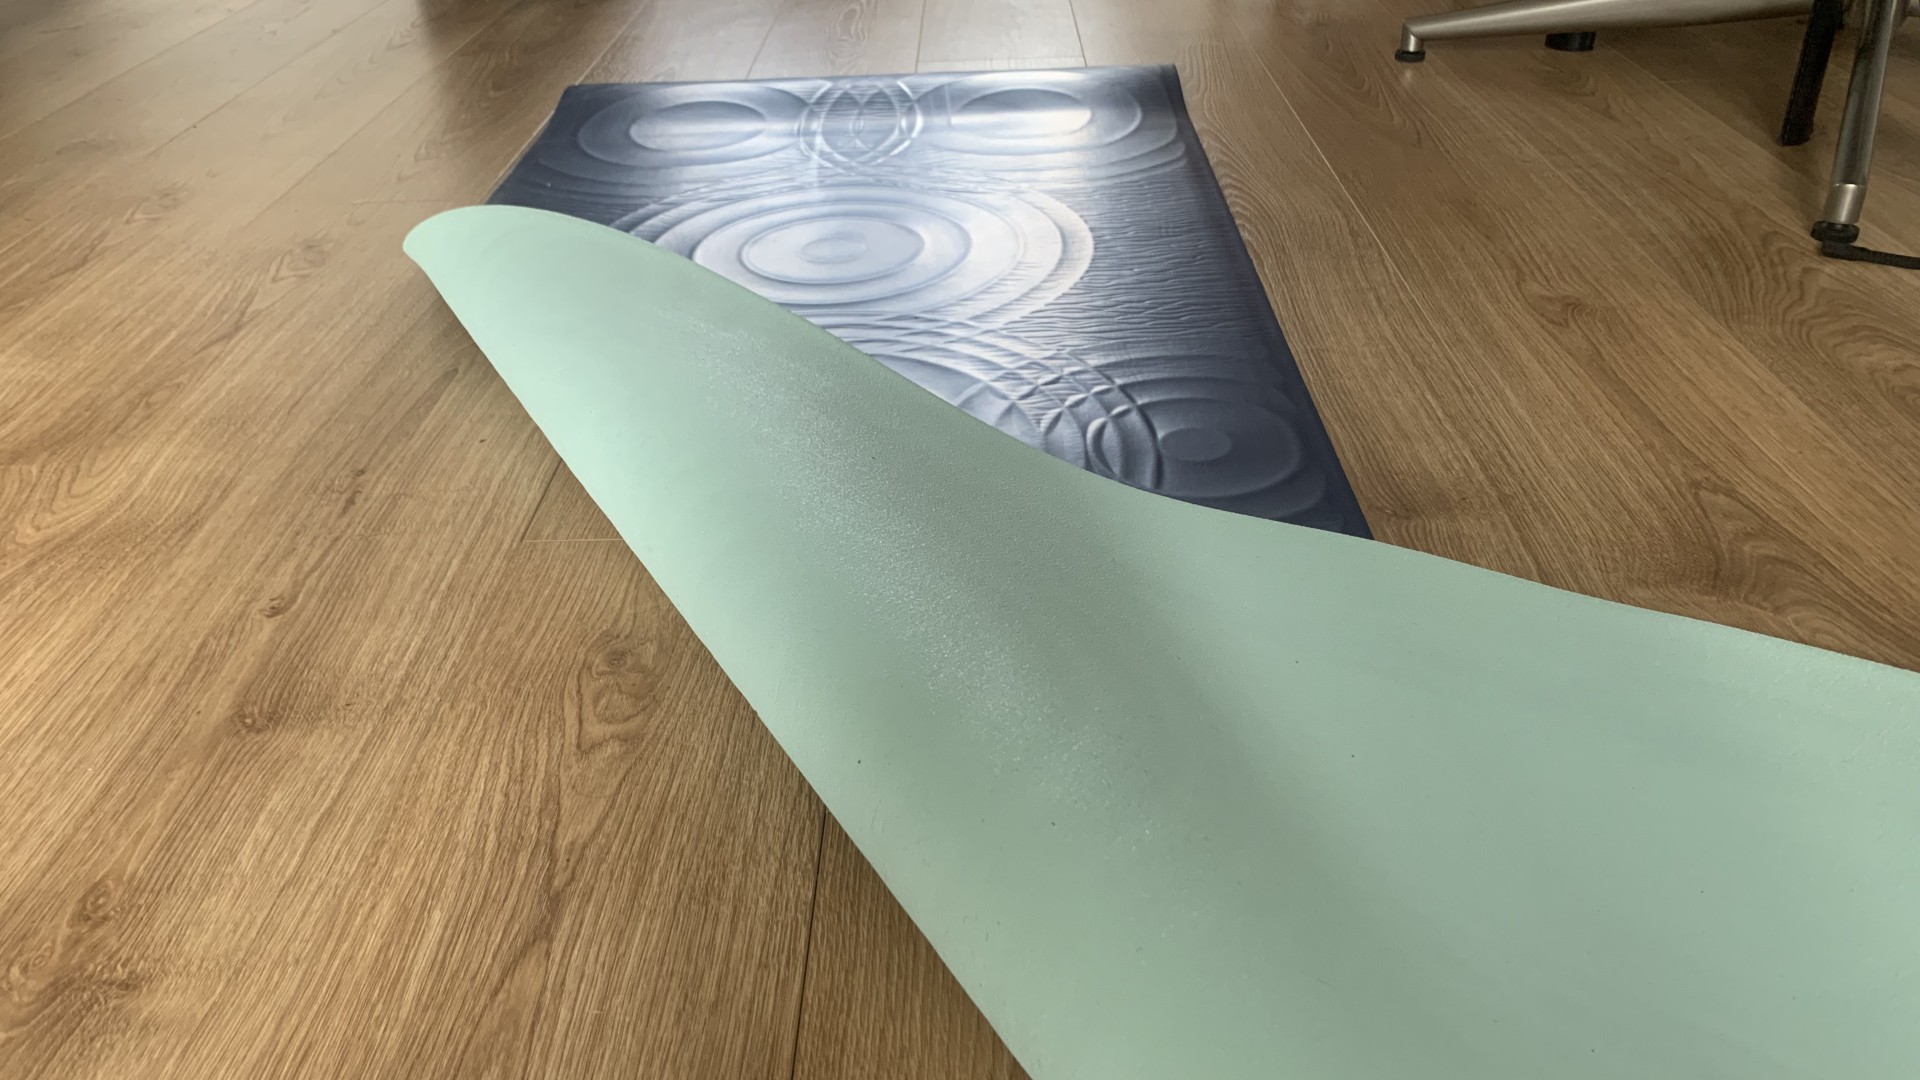 Lululemon Take Form mat rolled out with the corner folded over